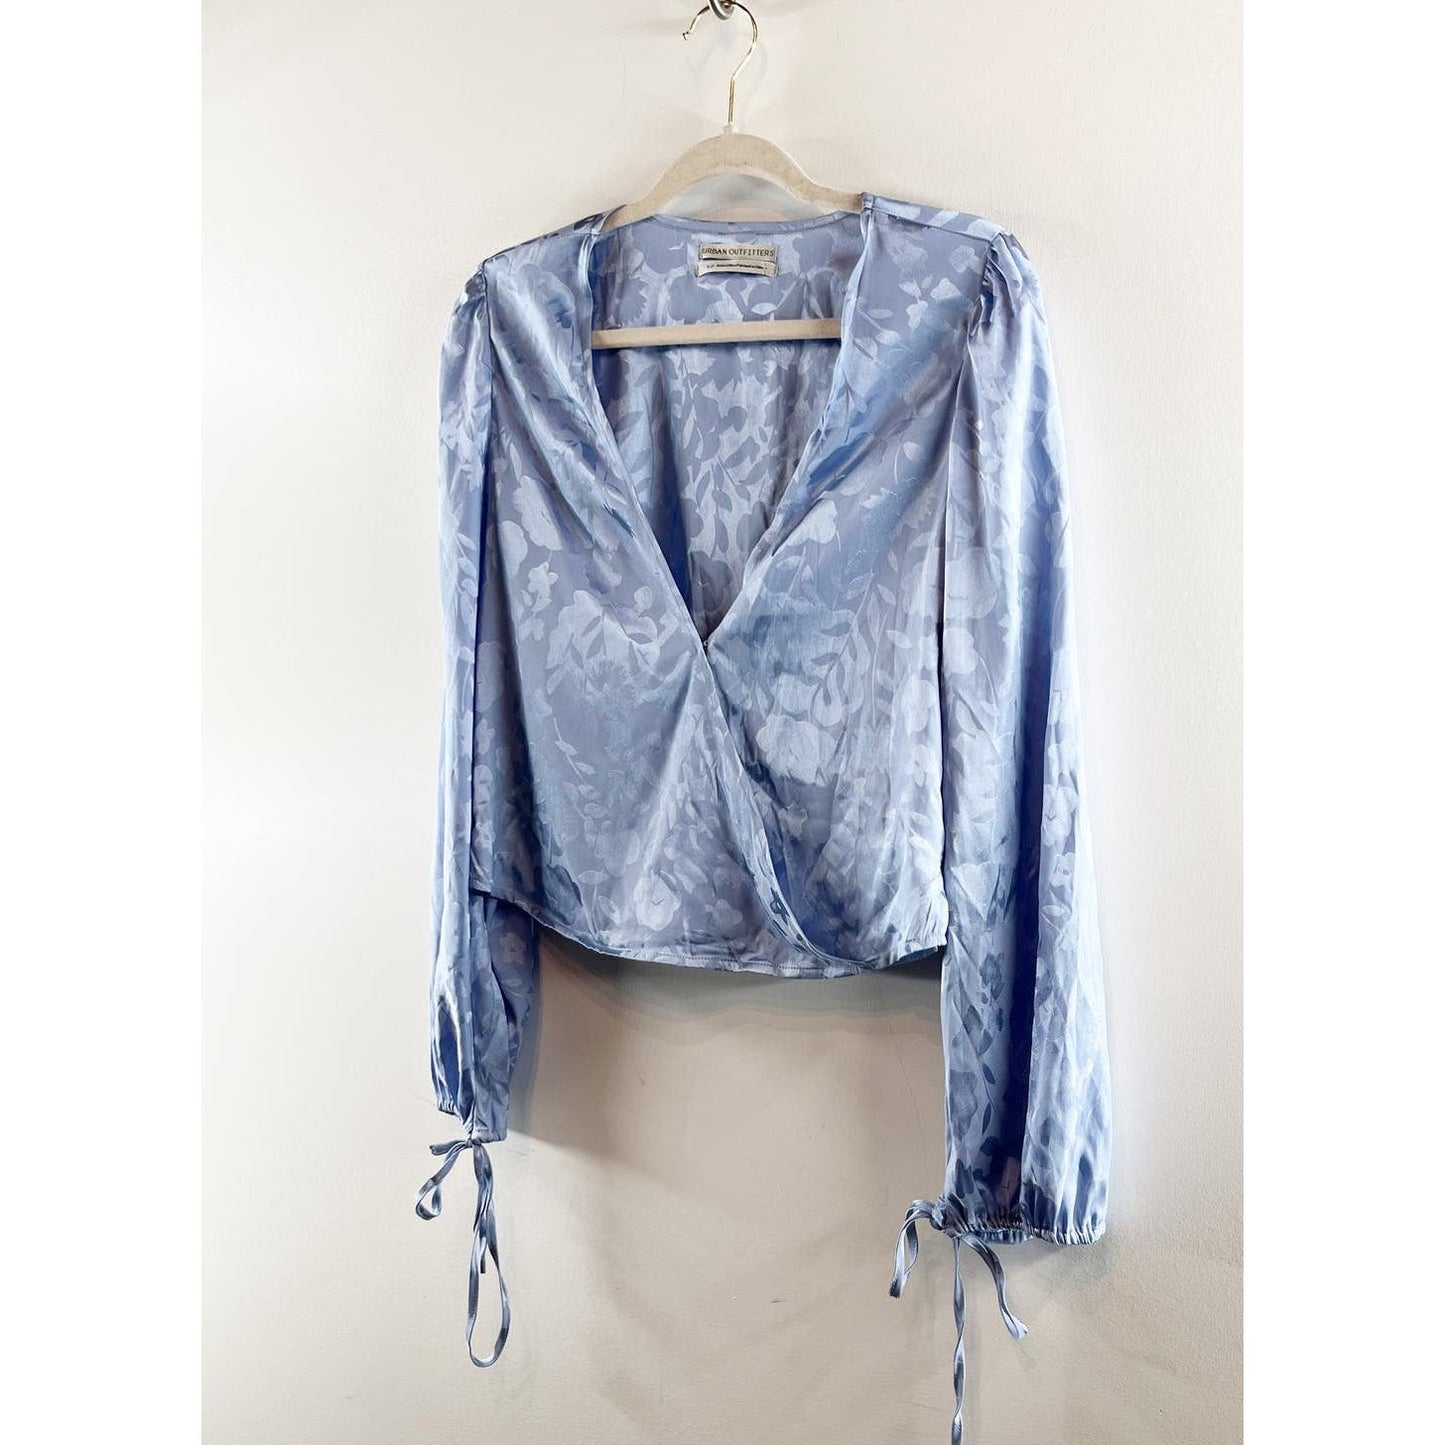 Urban Outfitters Audrina Plunge Wrap Jacquard Balloon Sleeve Blouse Blue Small